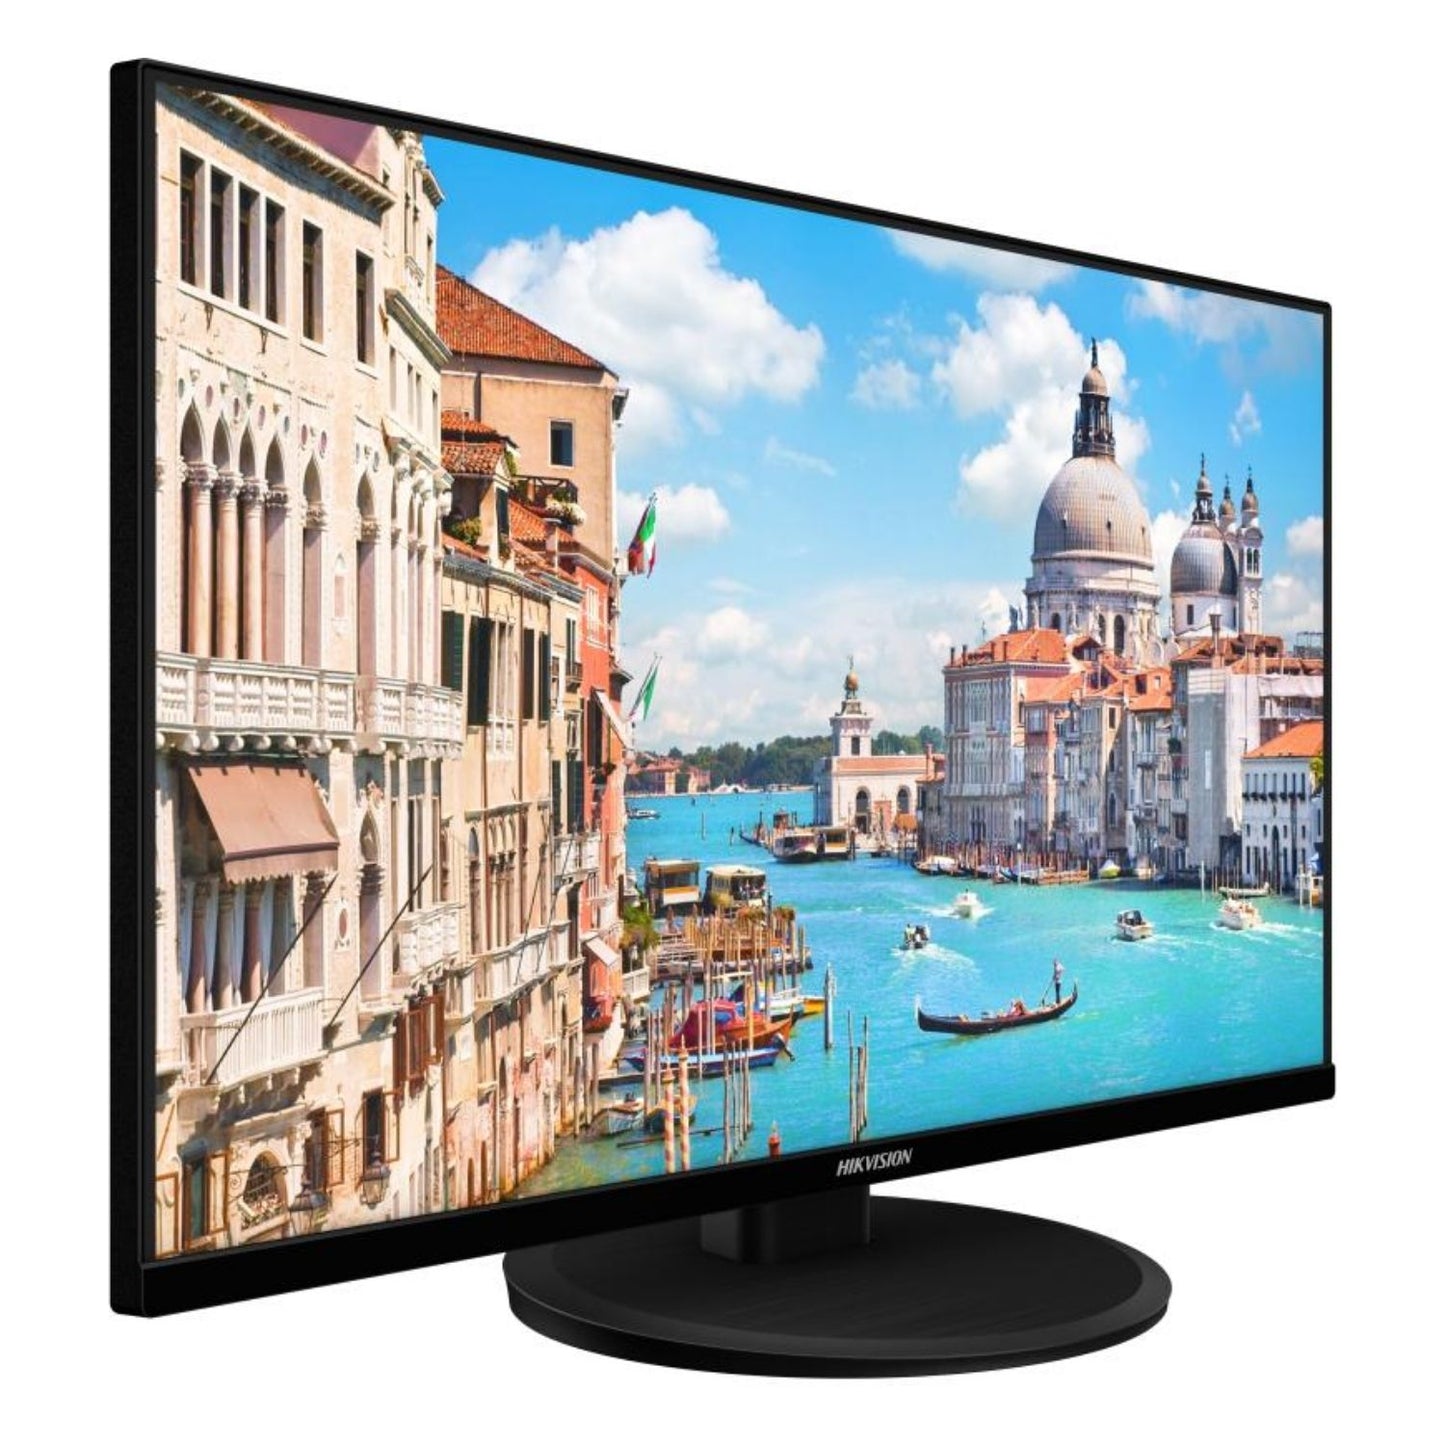 DS-D5027UC  -  27-inch 4K Monitor